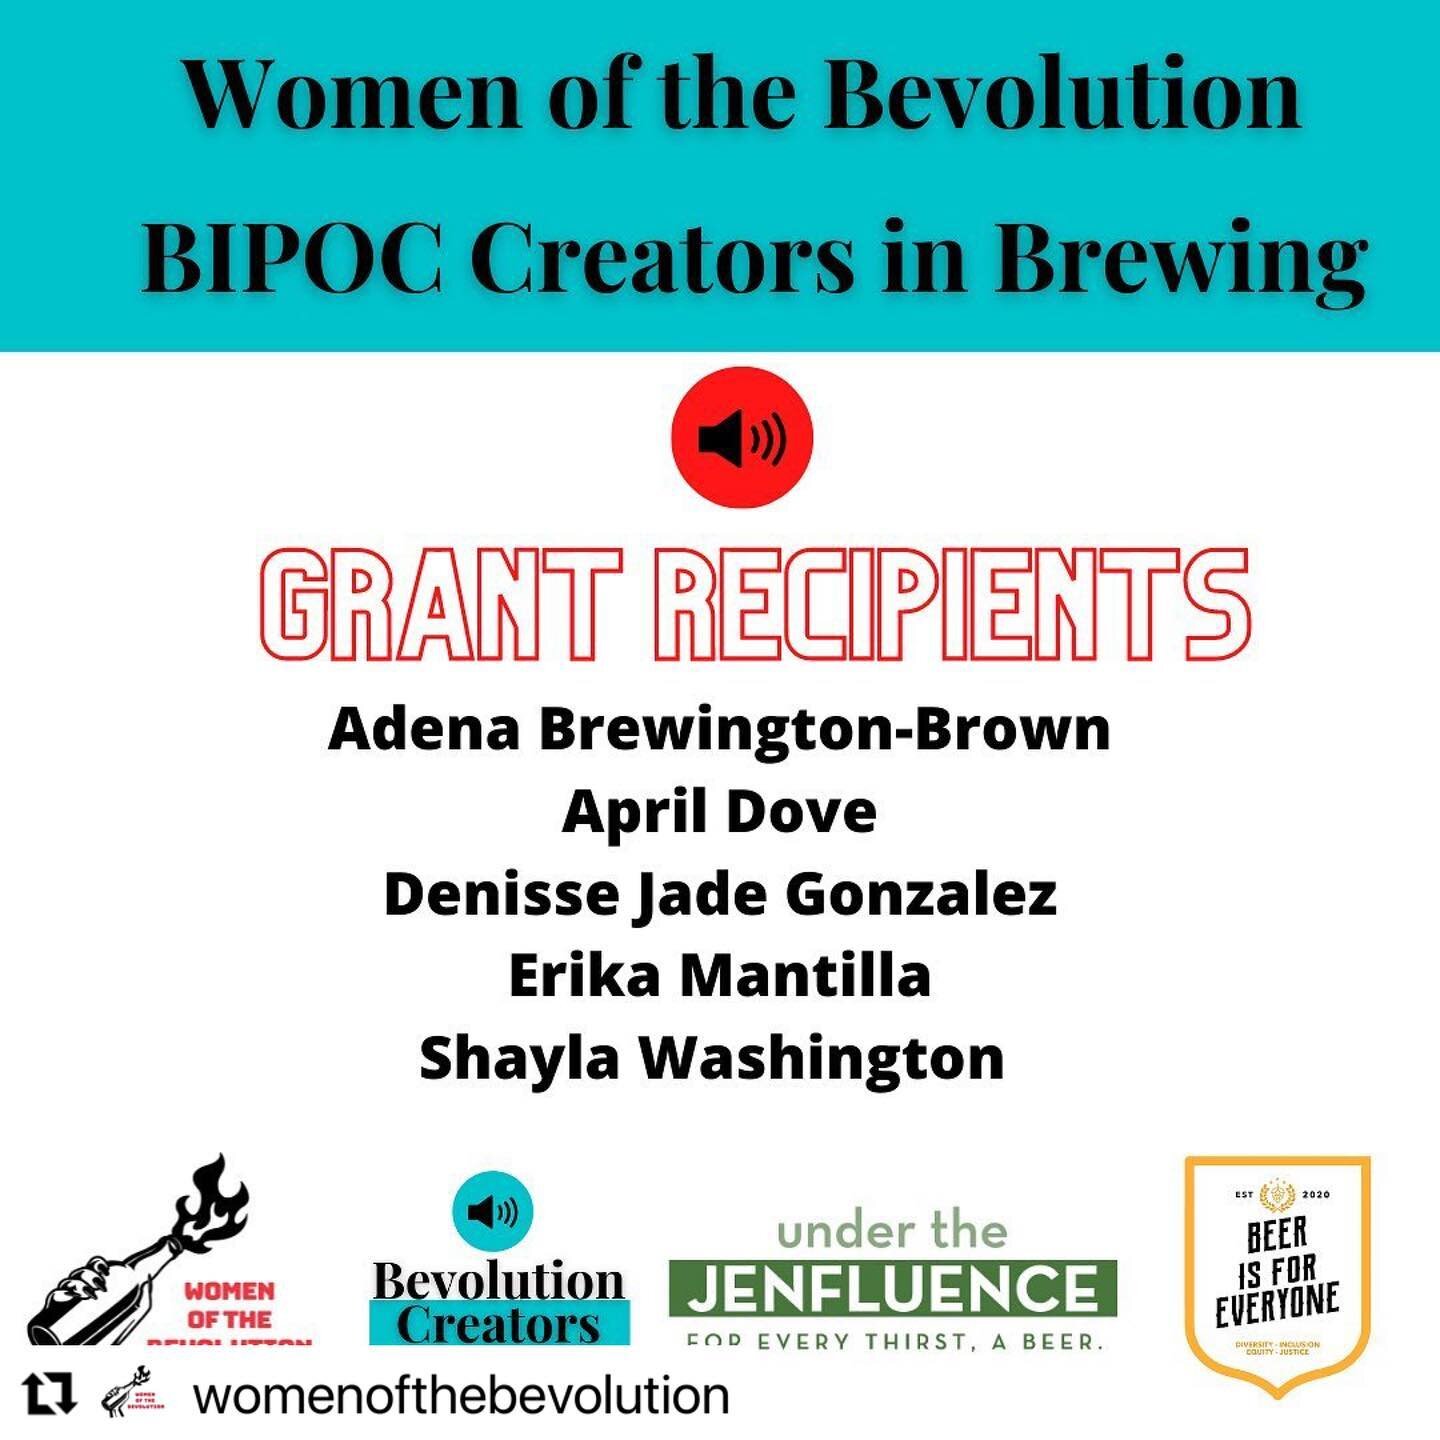 #Repost @womenofthebevolution 
・・・
Thank you to all who submitted for our first Women of the Bevolution BIPOC Creators in Brewing Grant! In collaboration with Jen Blair @underthejenfluence and Lindsay Malu Kido @beerisforeveryone, we have selected 5 